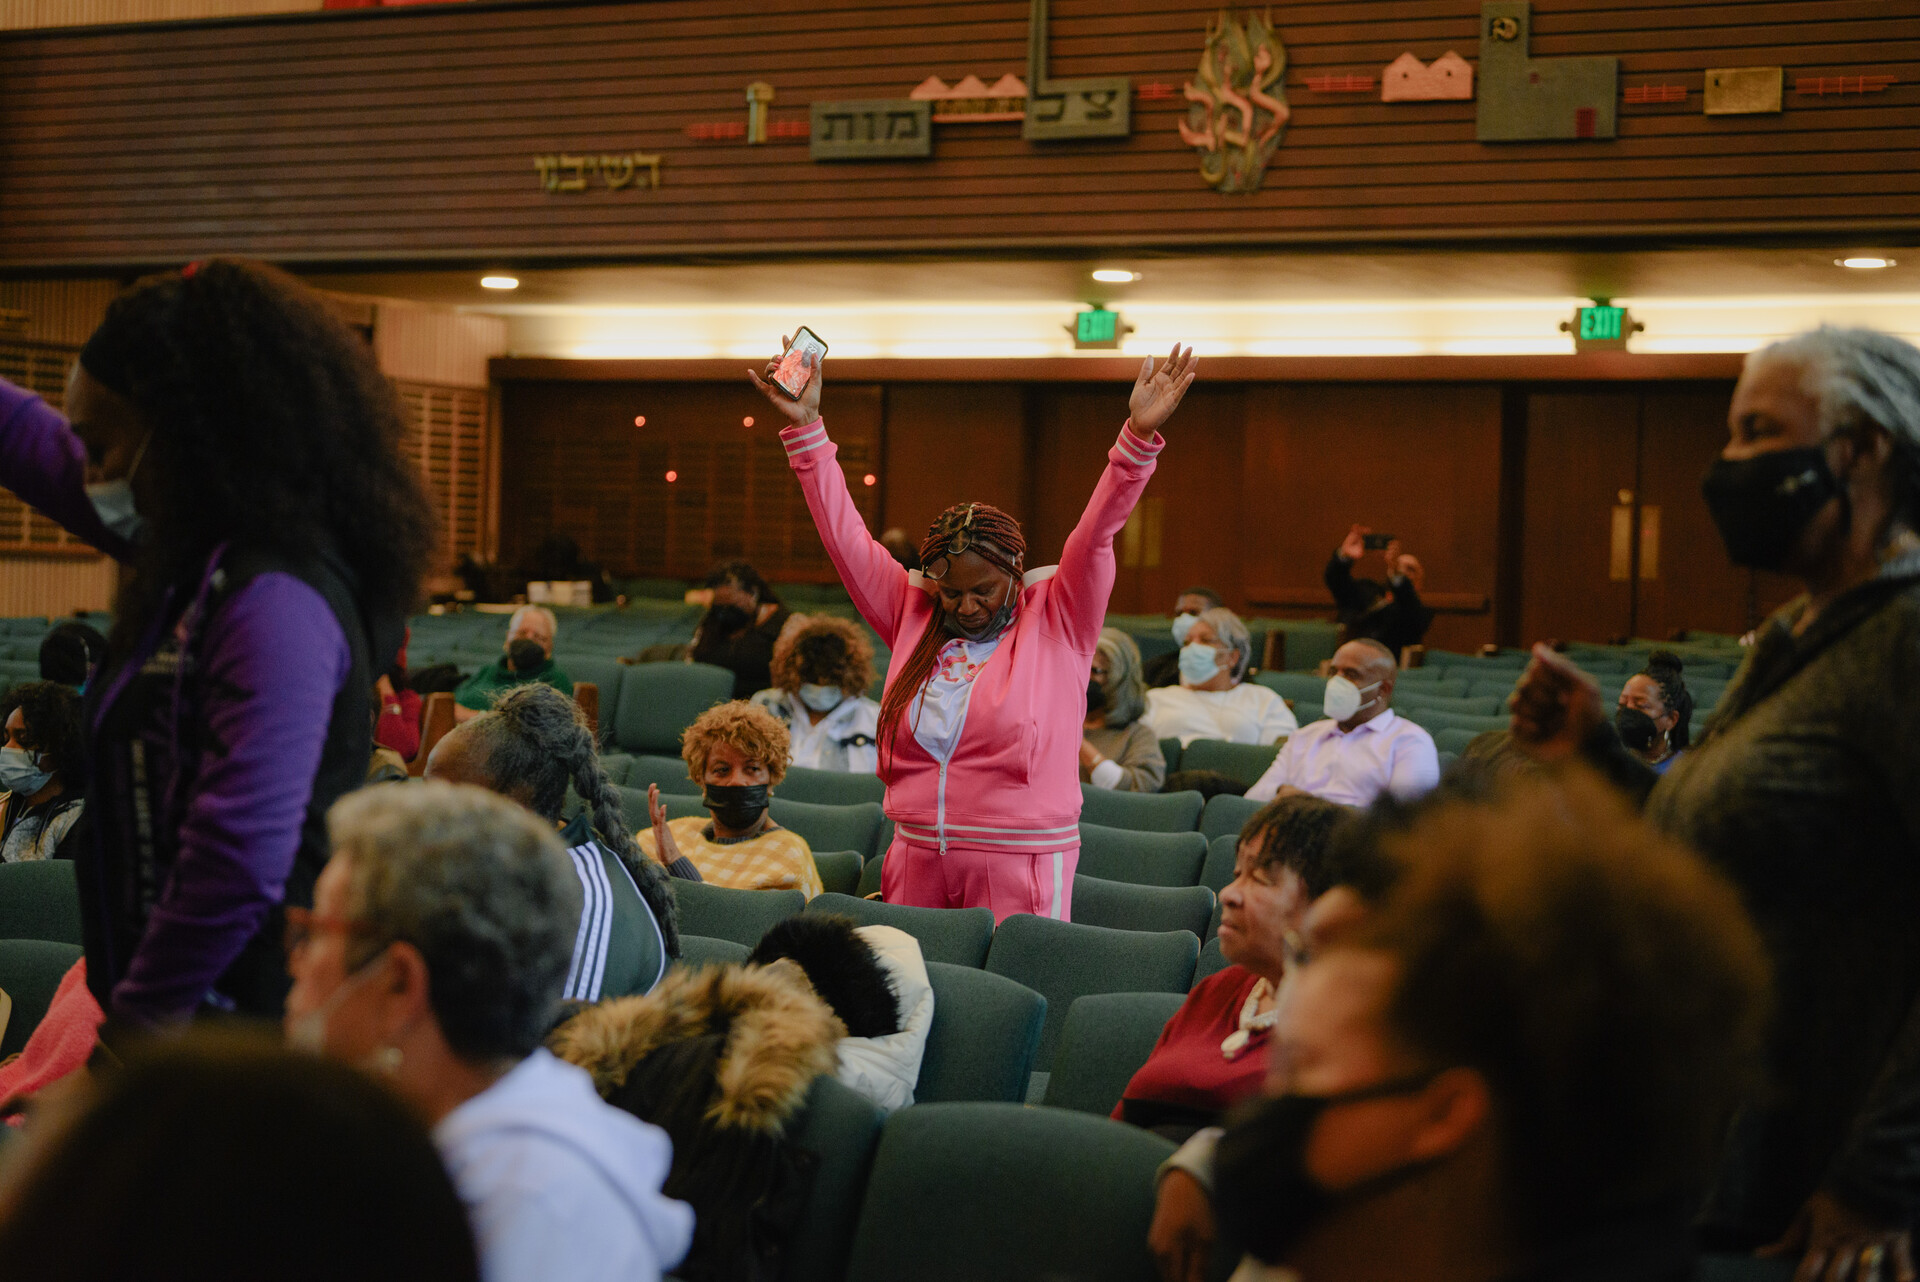 An African American woman wearing a pink jumpsuit stands with both hands raised among several people who are seated in a building.